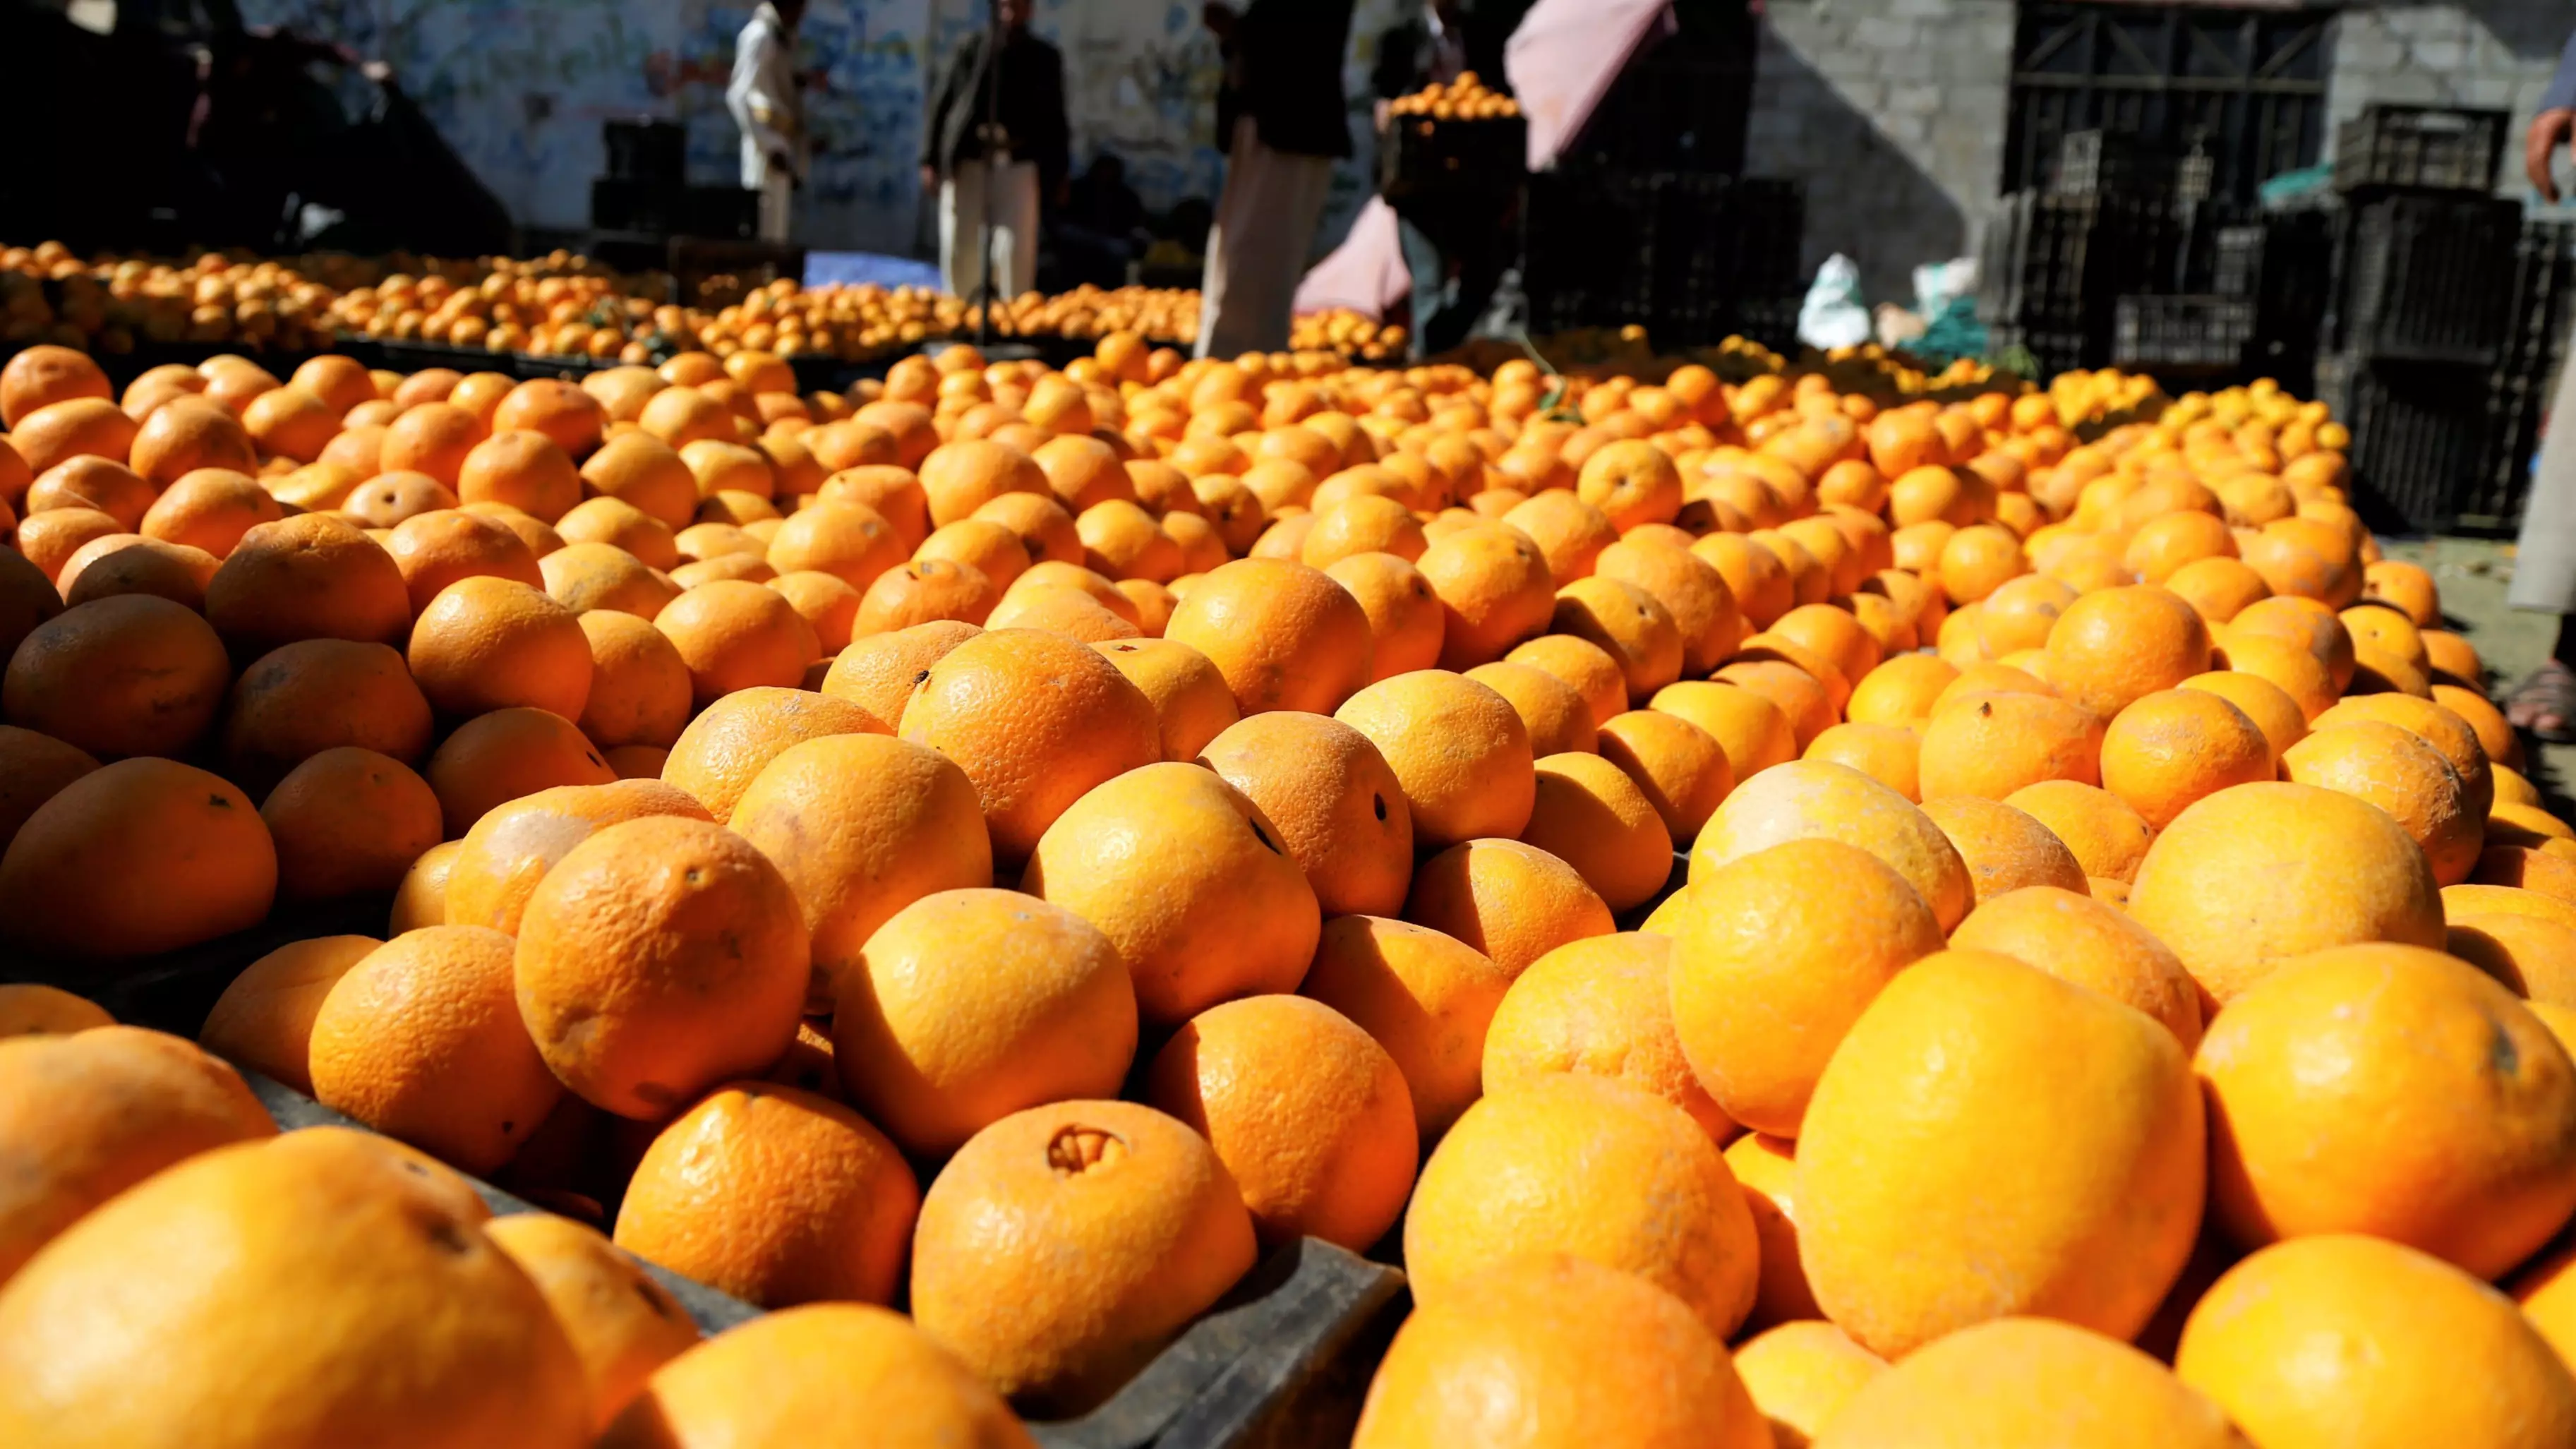 Passengers Sustain Mouth Ulcers After Eating 30kg Of Oranges To Avoid Baggage Fee